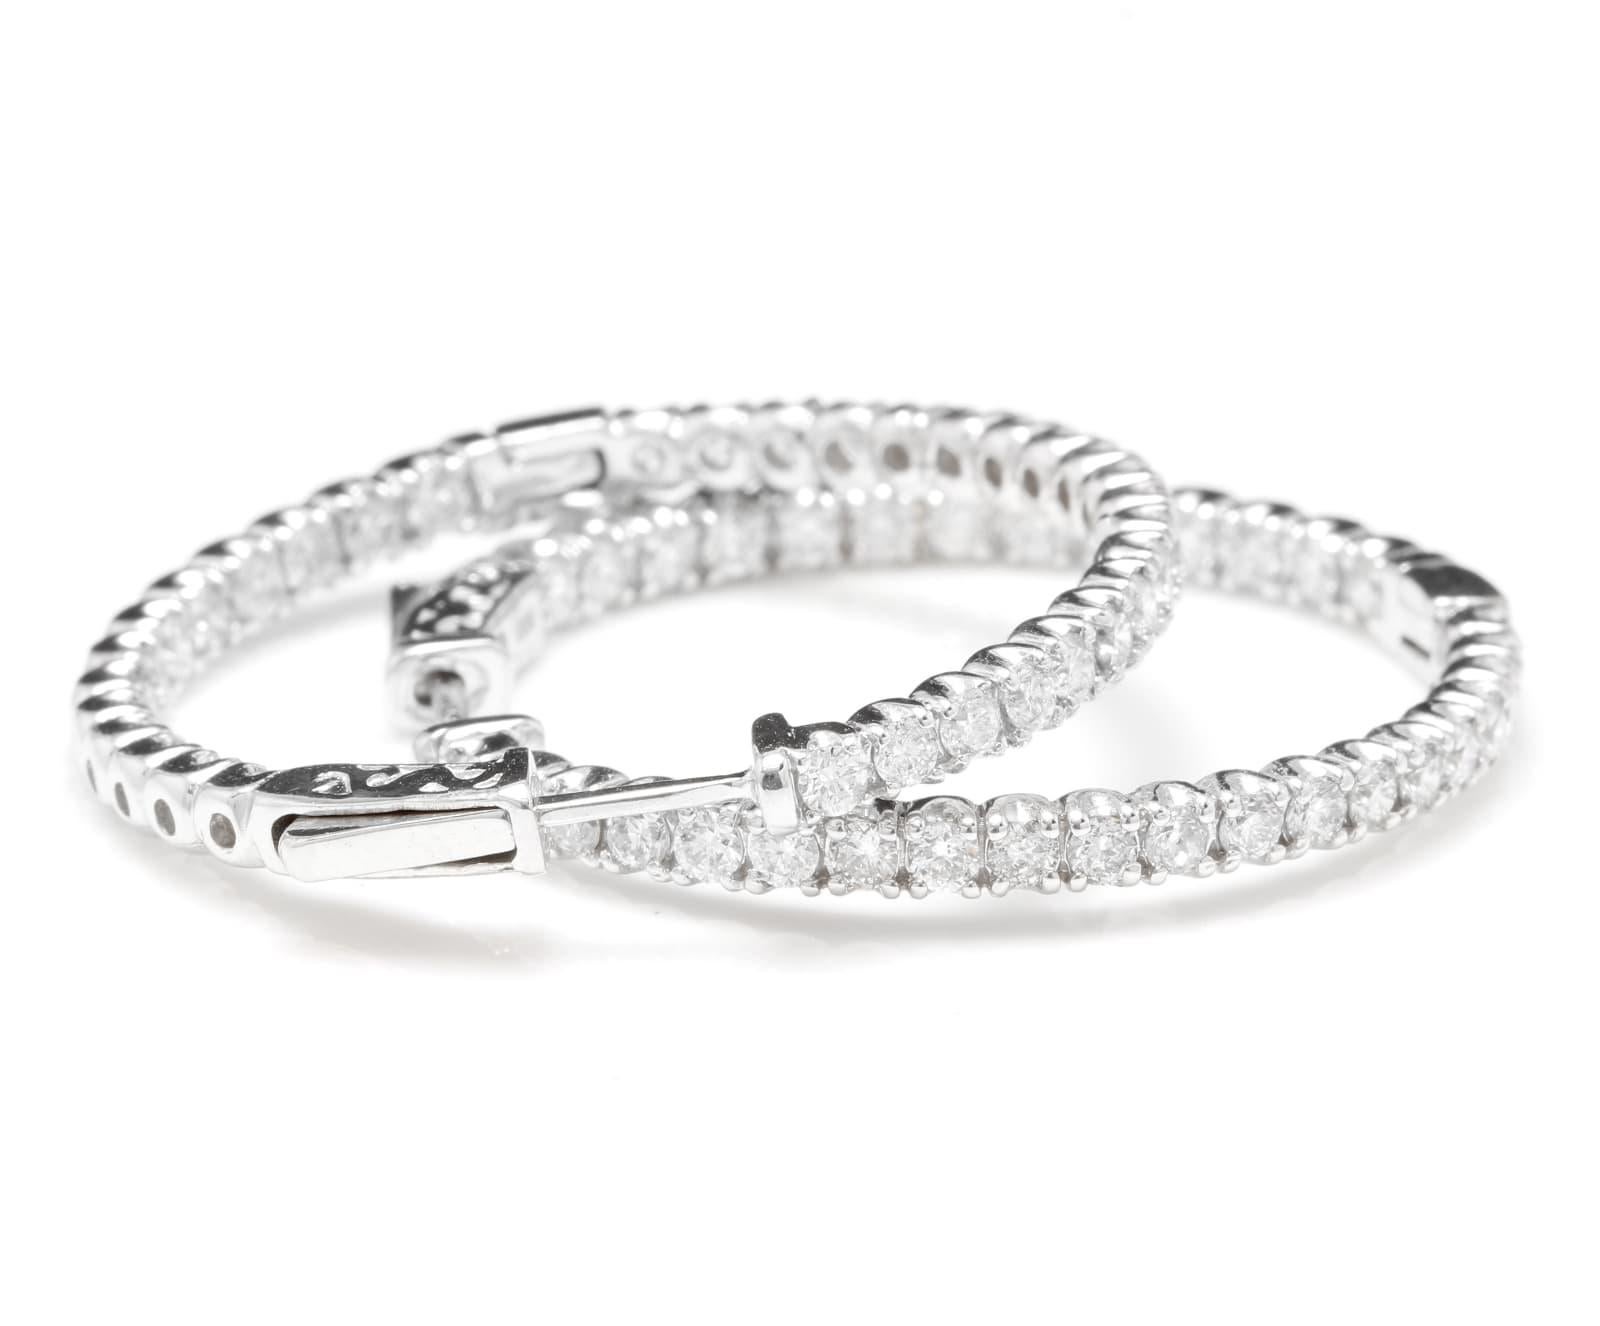 Exquisite 2.85 Carat Natural Diamond 14 Karat Solid White Gold Hoop Earrings For Sale 1